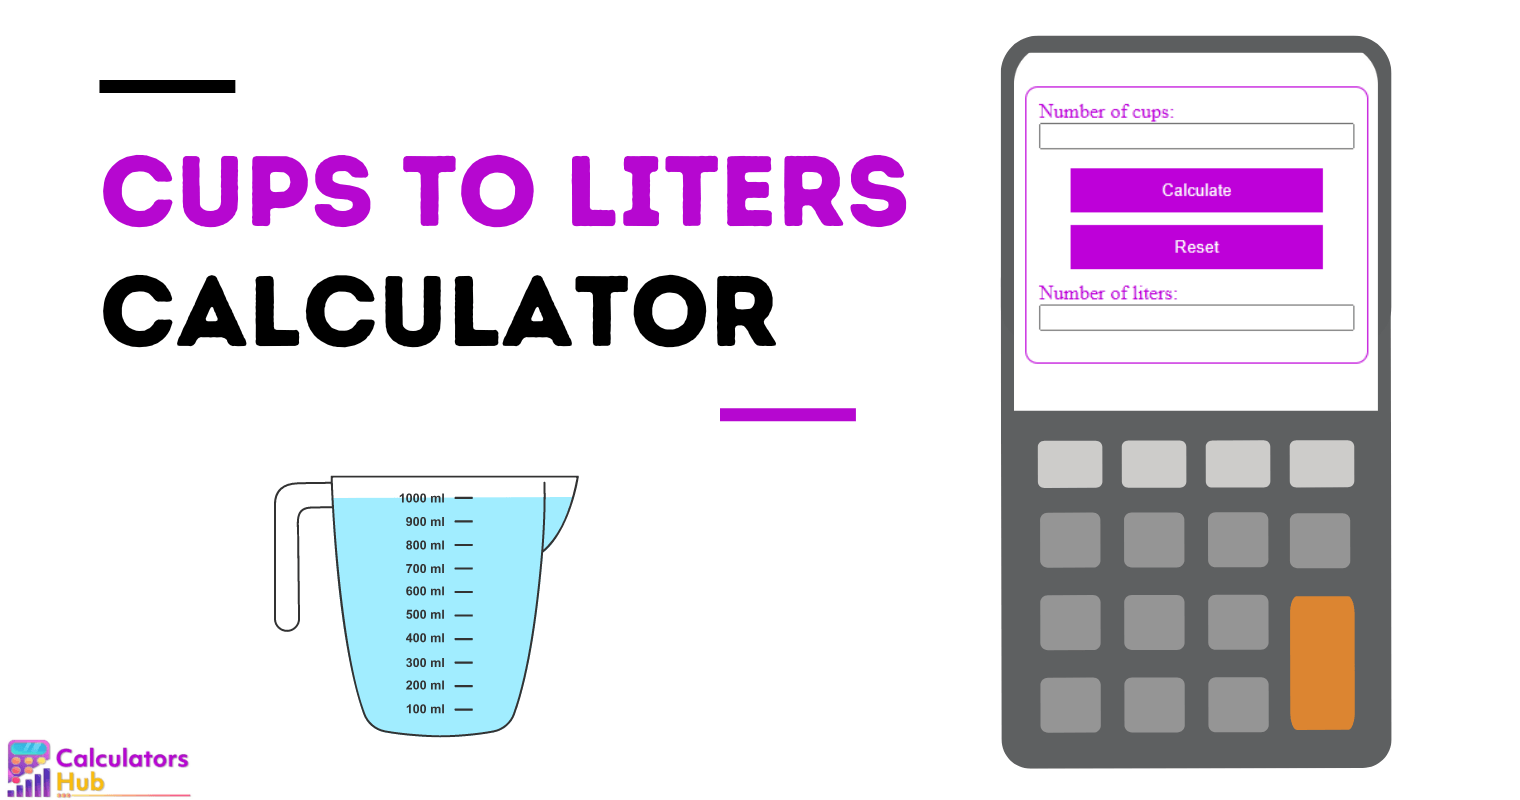 Cups to Liters Calculator